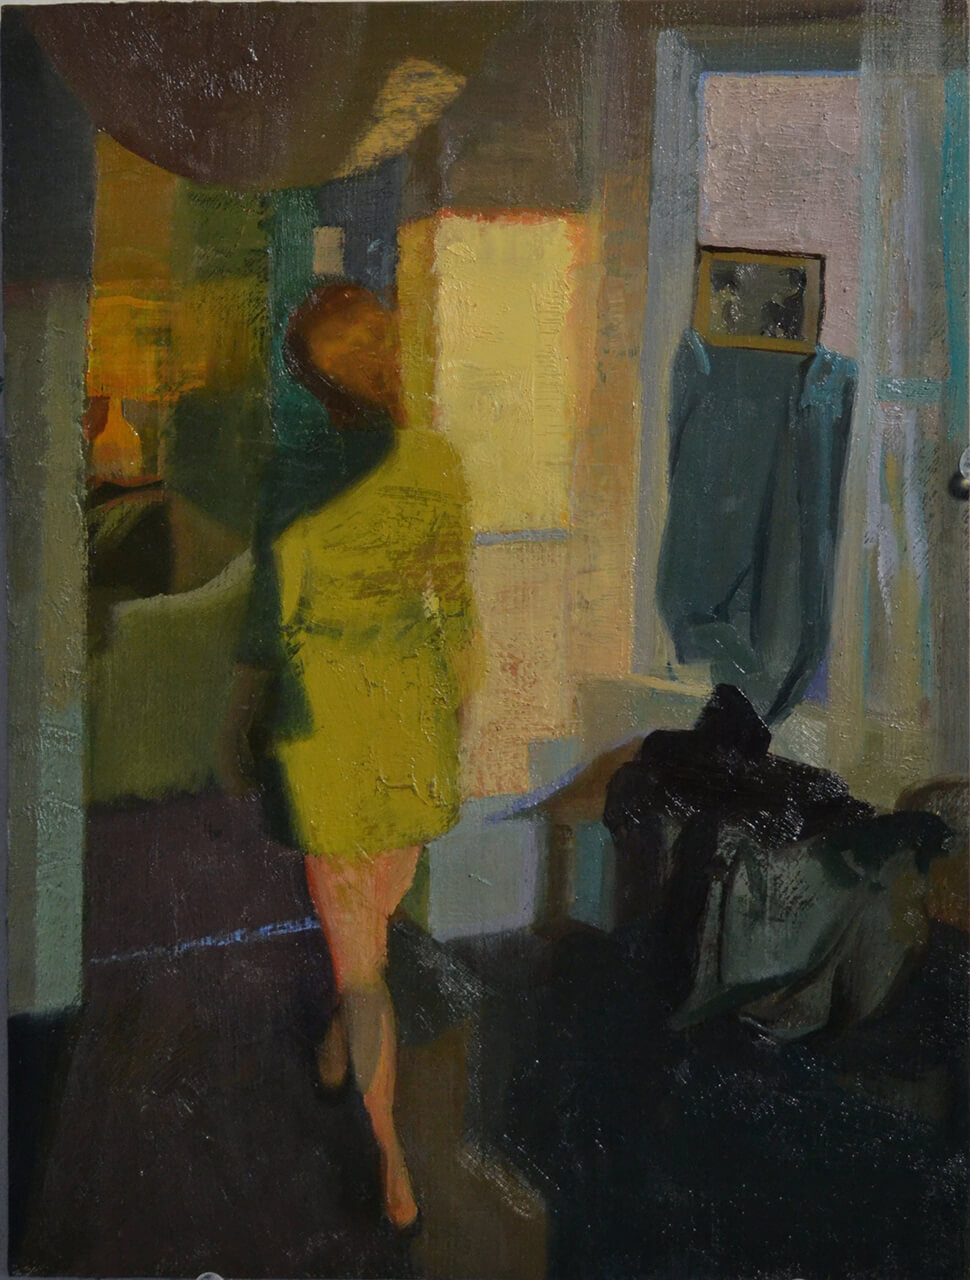 Emil Robinson, Catherine in Green, 2012-13 (courtesy of the artist)